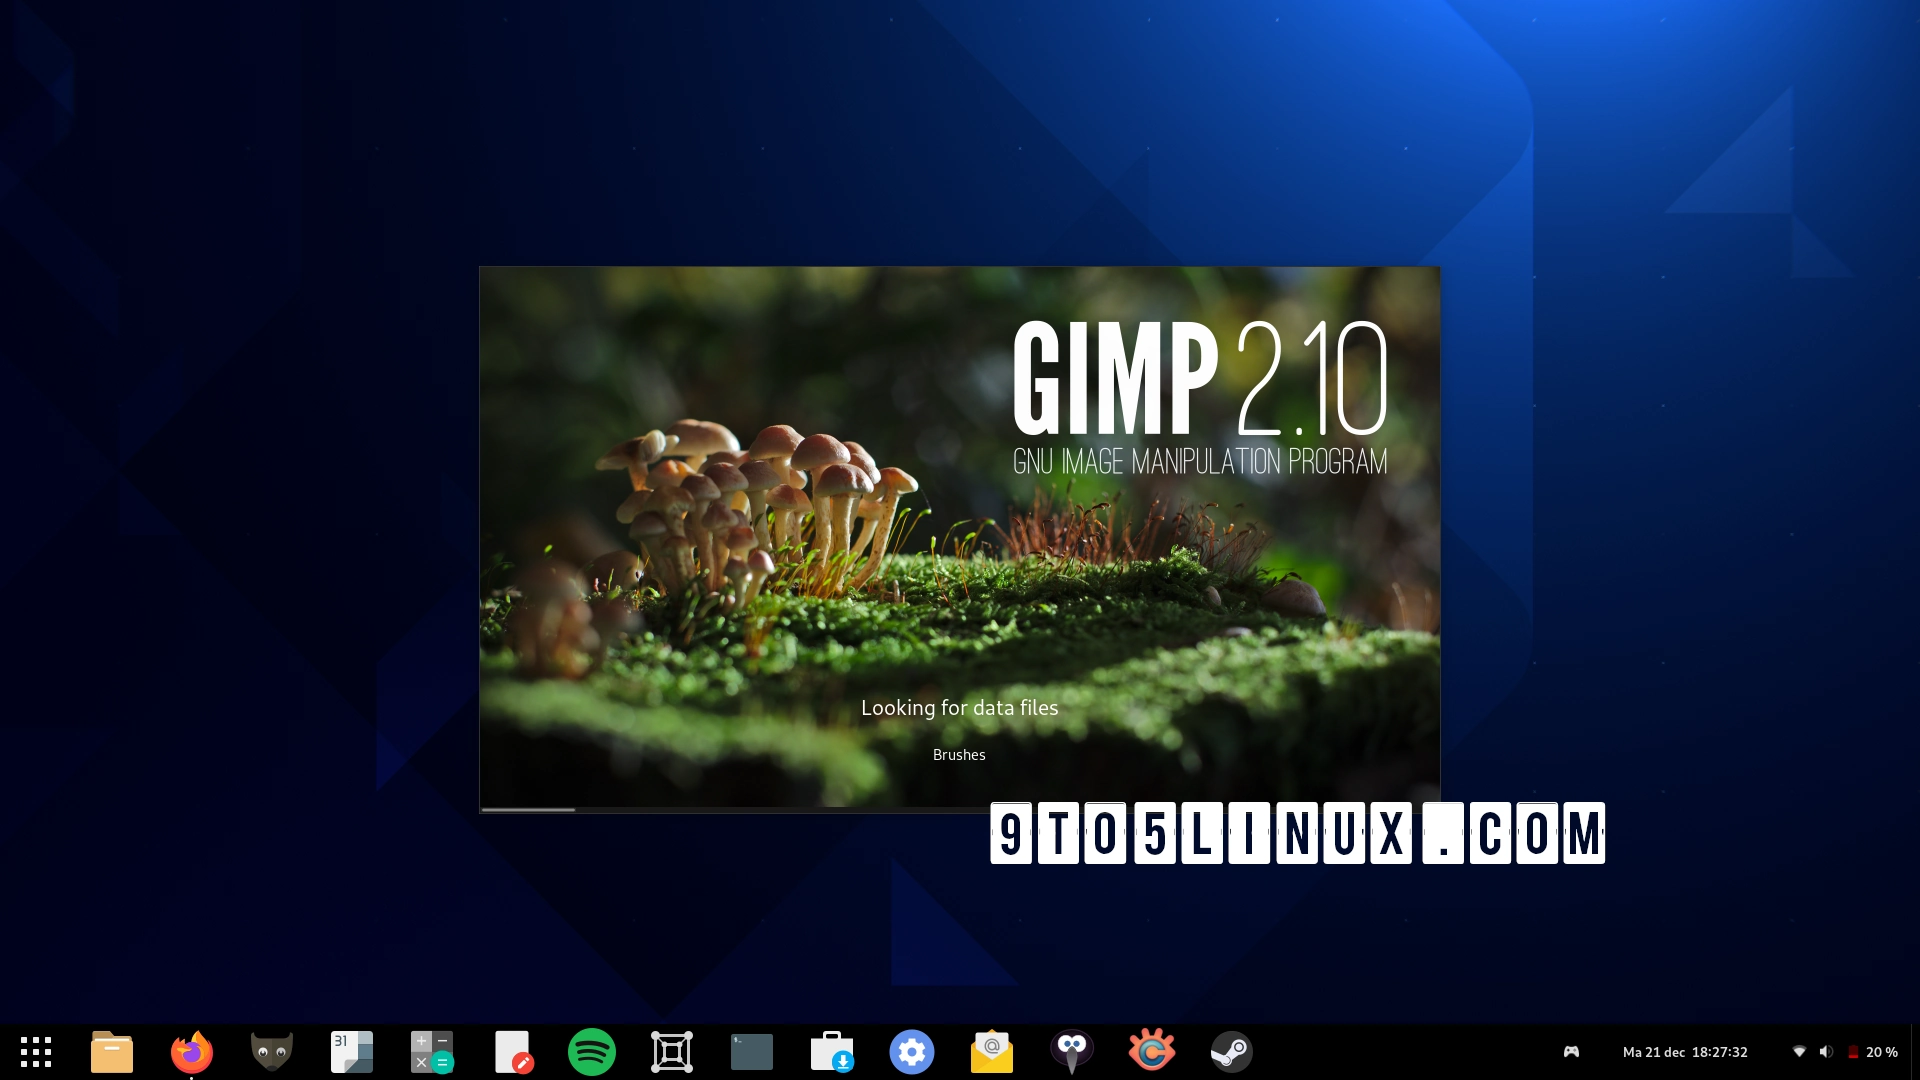 GIMP 2.10.30 Improves Support for PSD and AVIF Files, Supports Modern Linux Distros